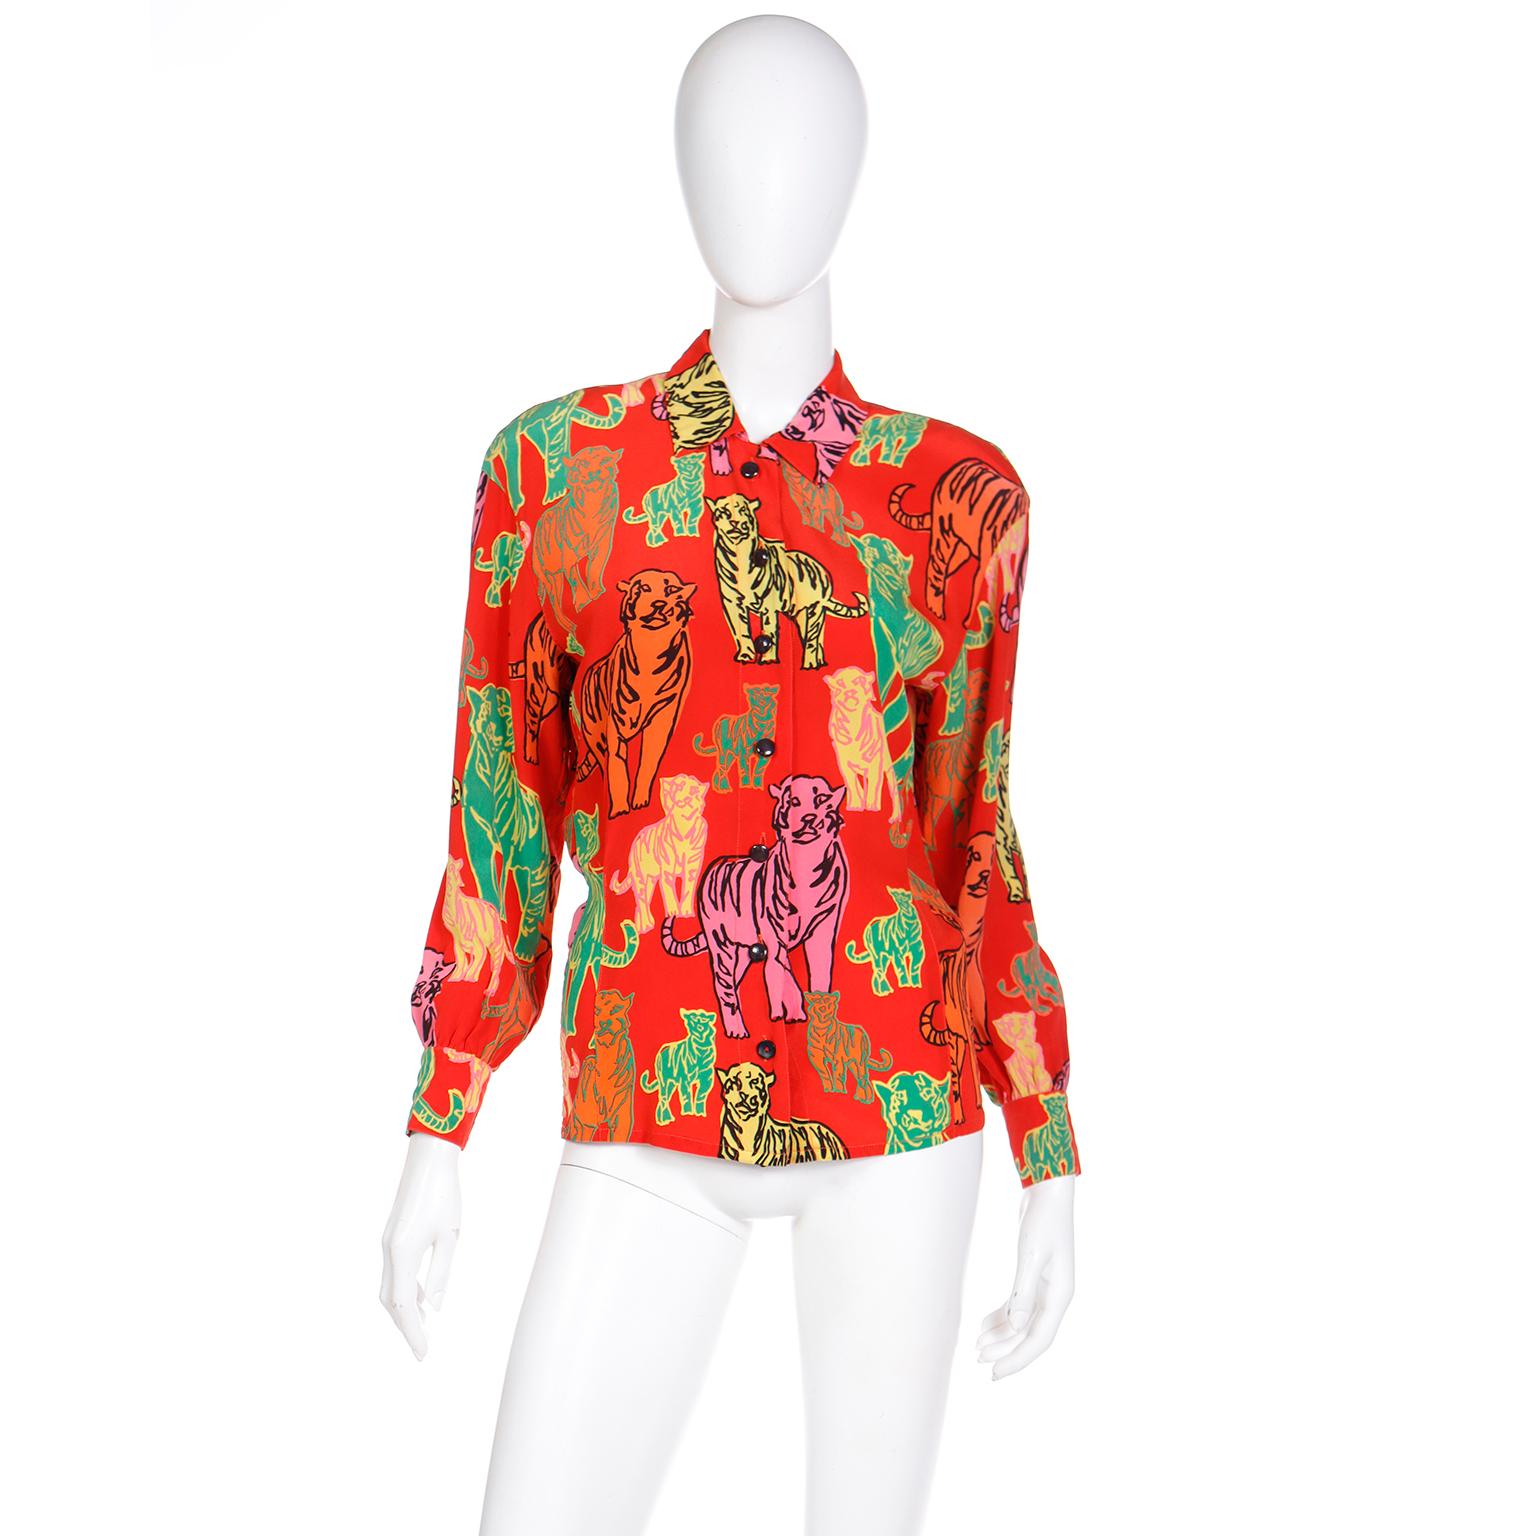 This is a fabulous vintage Escada Margaretha Ley novelty print red silk blouse that features tigers in bold shades of green, pink, yellow, and orange. The tigers are outlined in contrasting hues and we love the way they stand out against the red